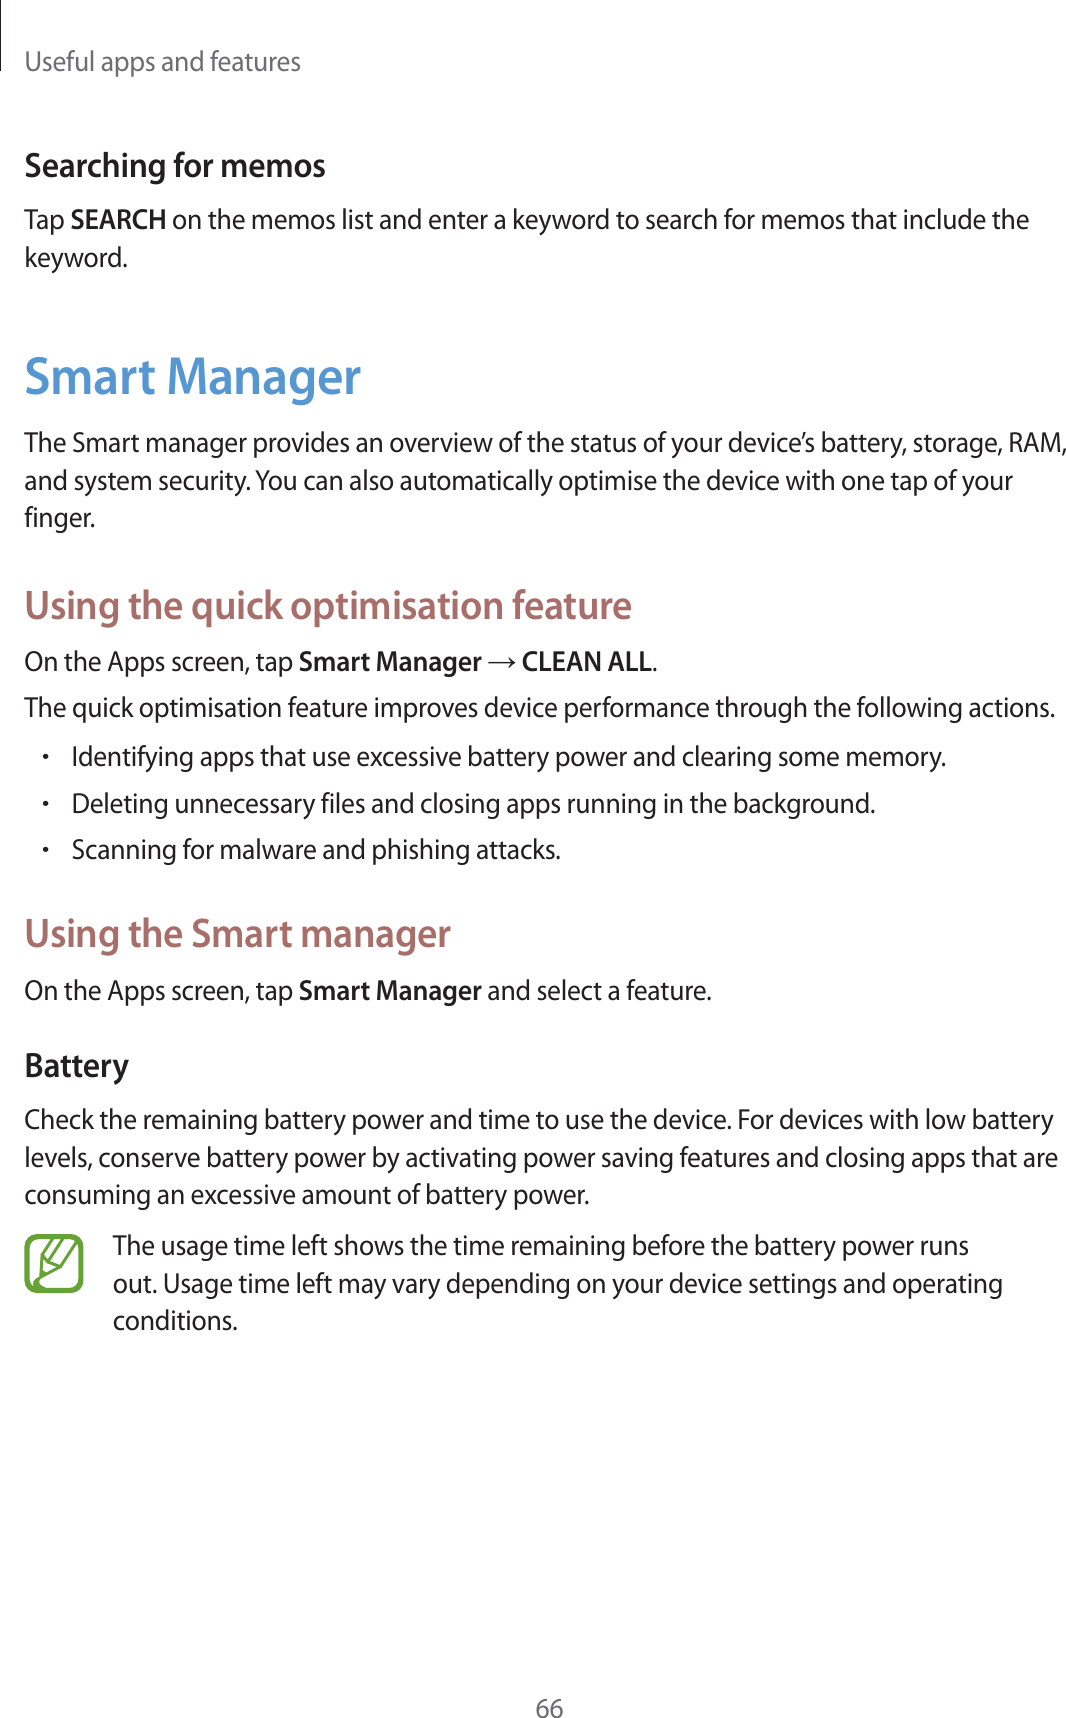 Useful apps and features66Searching for memosTap SEARCH on the memos list and enter a keyword to search for memos that include the keyword.Smart ManagerThe Smart manager provides an overview of the status of your device’s battery, storage, RAM, and system security. You can also automatically optimise the device with one tap of your finger.Using the quick optimisation featureOn the Apps screen, tap Smart Manager ĺ CLEAN ALL.The quick optimisation feature improves device performance through the following actions.rIdentifying apps that use excessive battery power and clearing some memory.rDeleting unnecessary files and closing apps running in the background.rScanning for malware and phishing attacks.Using the Smart managerOn the Apps screen, tap Smart Manager and select a feature.BatteryCheck the remaining battery power and time to use the device. For devices with low battery levels, conserve battery power by activating power saving features and closing apps that are consuming an excessive amount of battery power.The usage time left shows the time remaining before the battery power runs out. Usage time left may vary depending on your device settings and operating conditions.